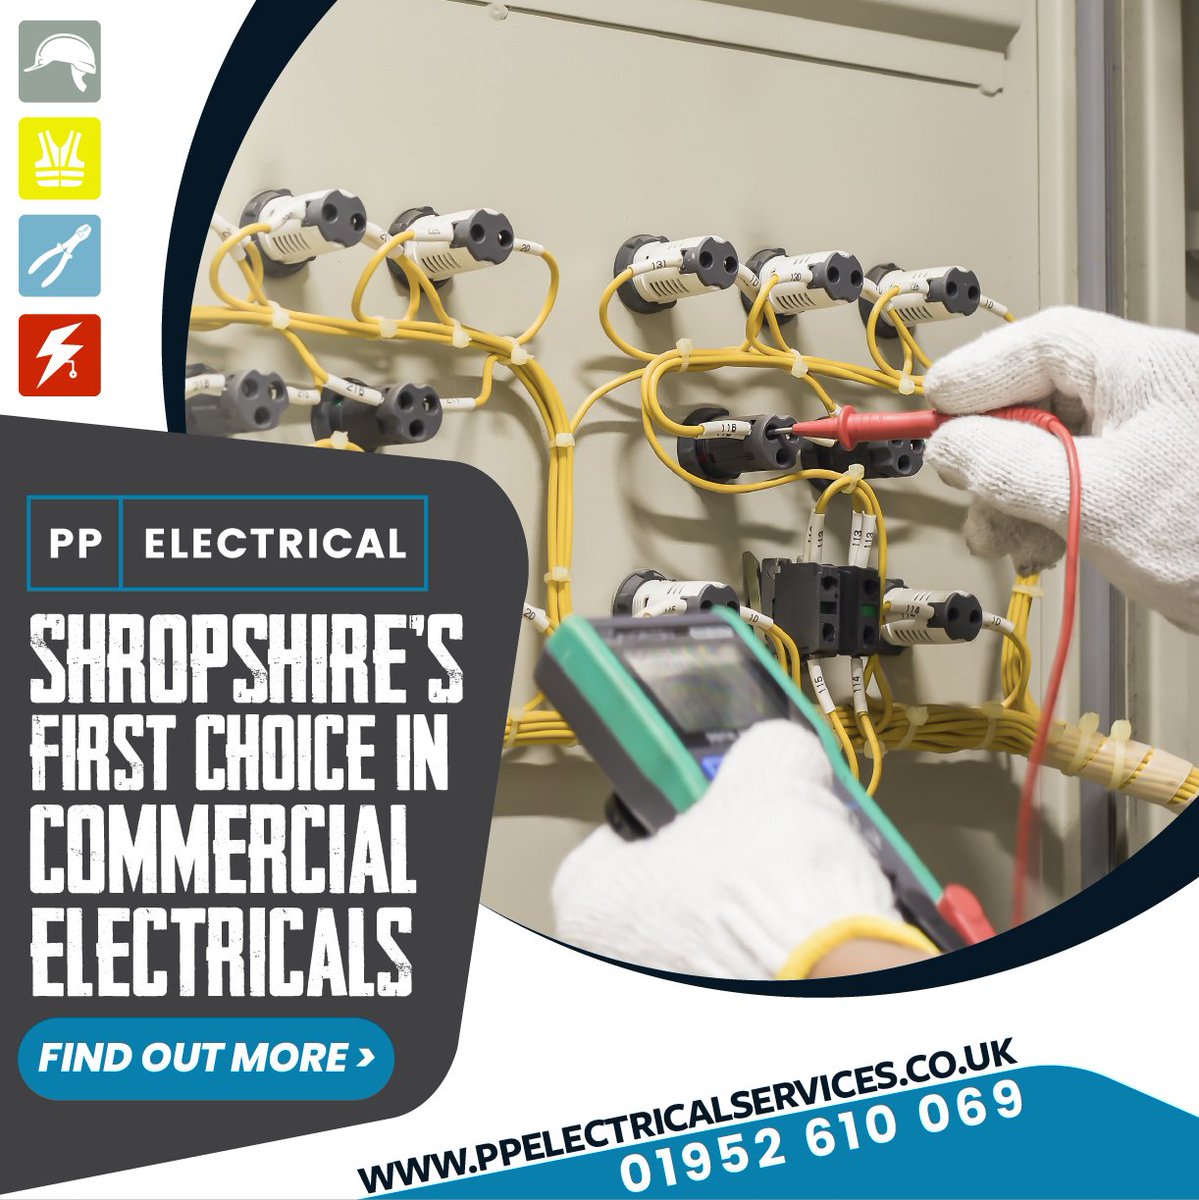 Shropshire’s First Choice in Commercial Electricals 🌐 ppelectricalservices.co.uk ⚡️ #Telford #Shrewsbury #sparky #electrician #electricians